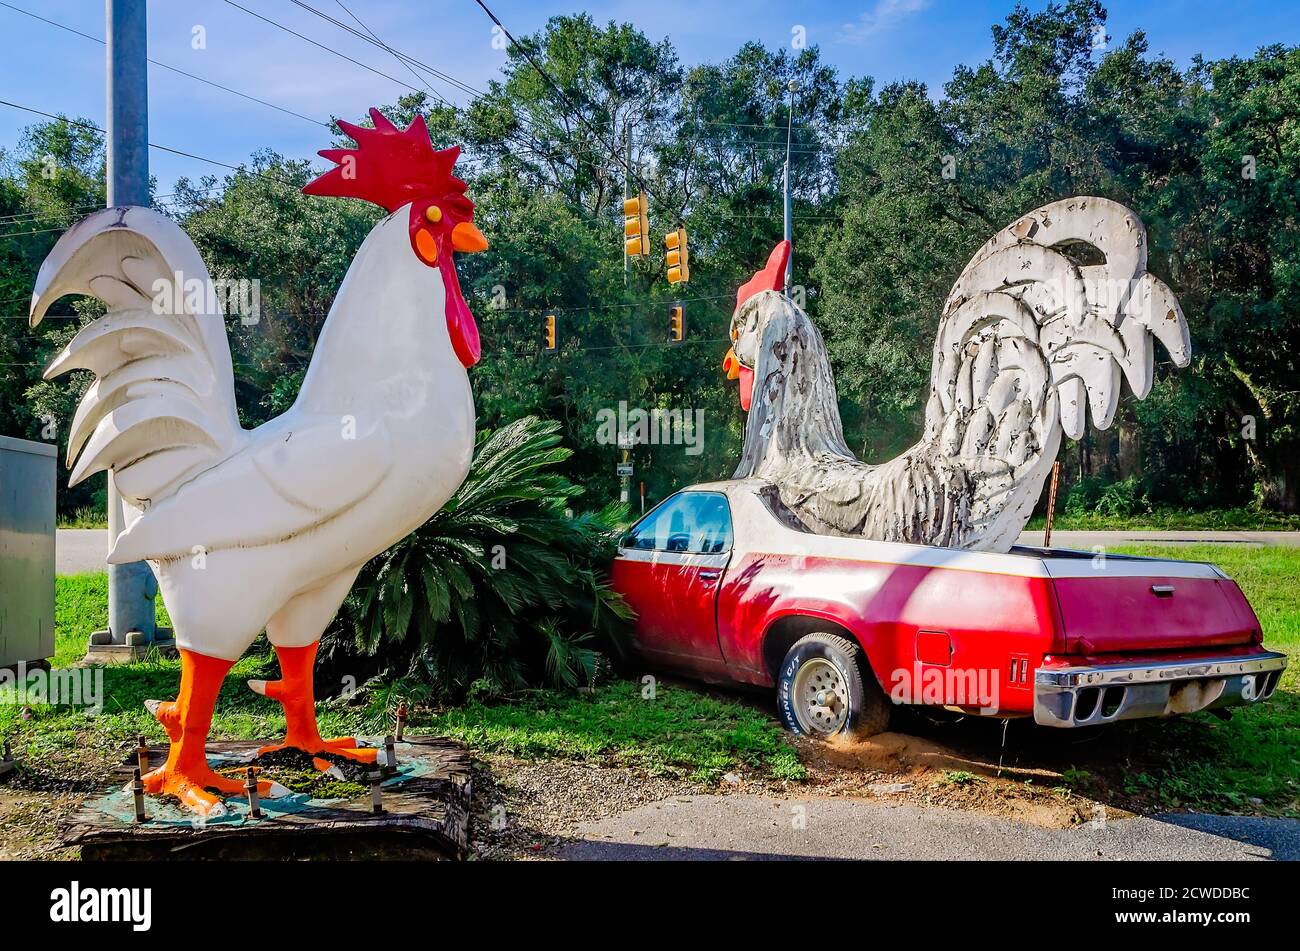 A giant chicken sits atop a 1977 El Camino in front of a Citgo gas station, Sept. 17, 2020, in Irvington, Alabama. The statues attract attention to th Stock Photo